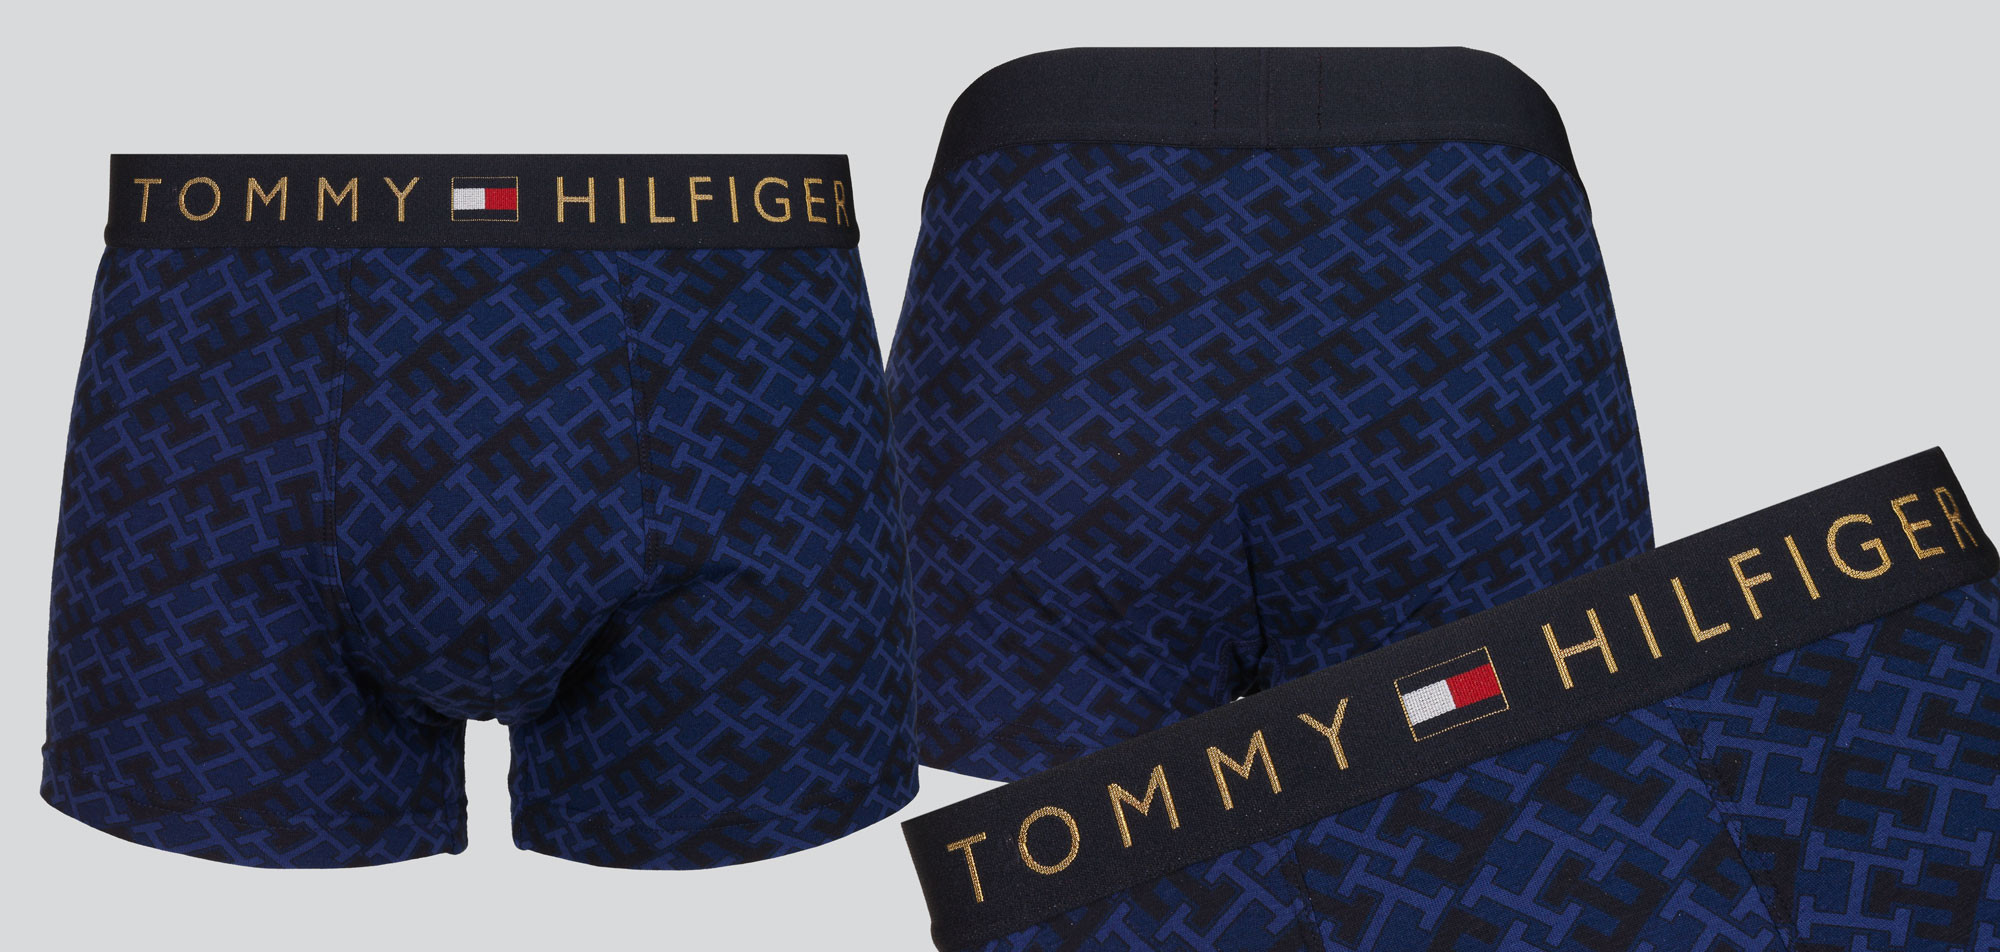 Tommy Hilfiger Trunk 966 Print, color Nee